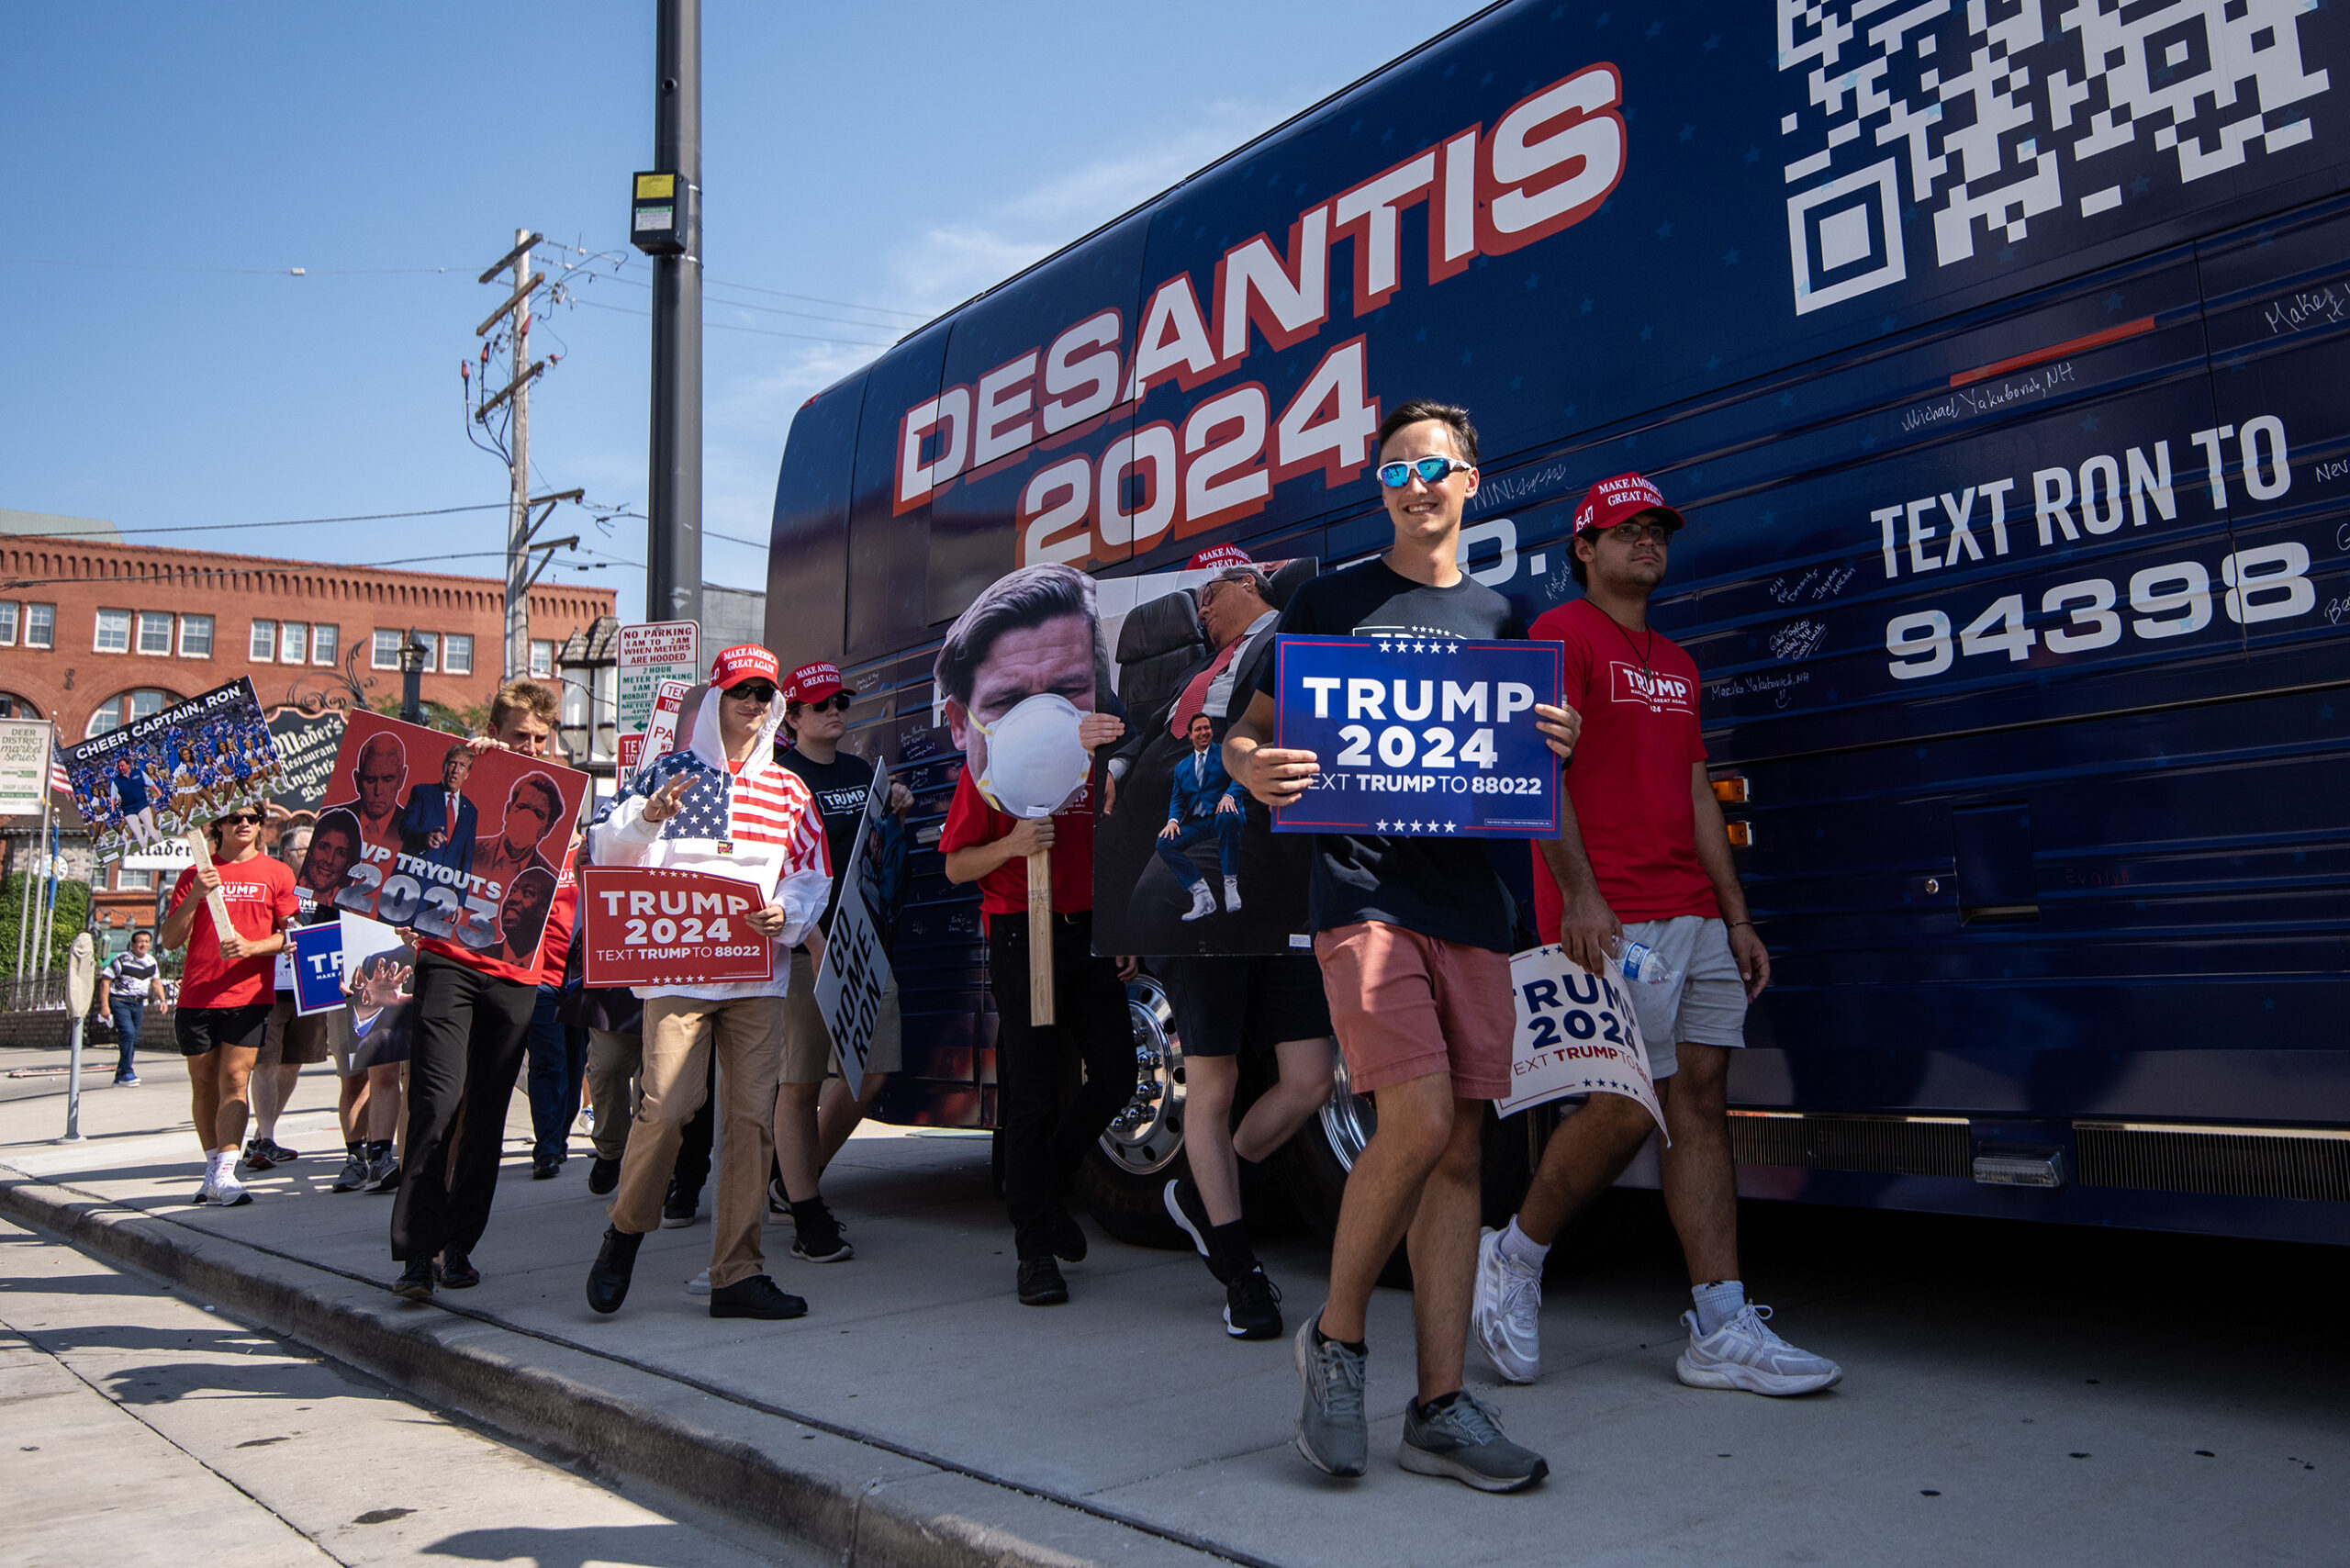 A blue van with the words "DeSantis 2024" is parked as protesters with Trump signs walk by.